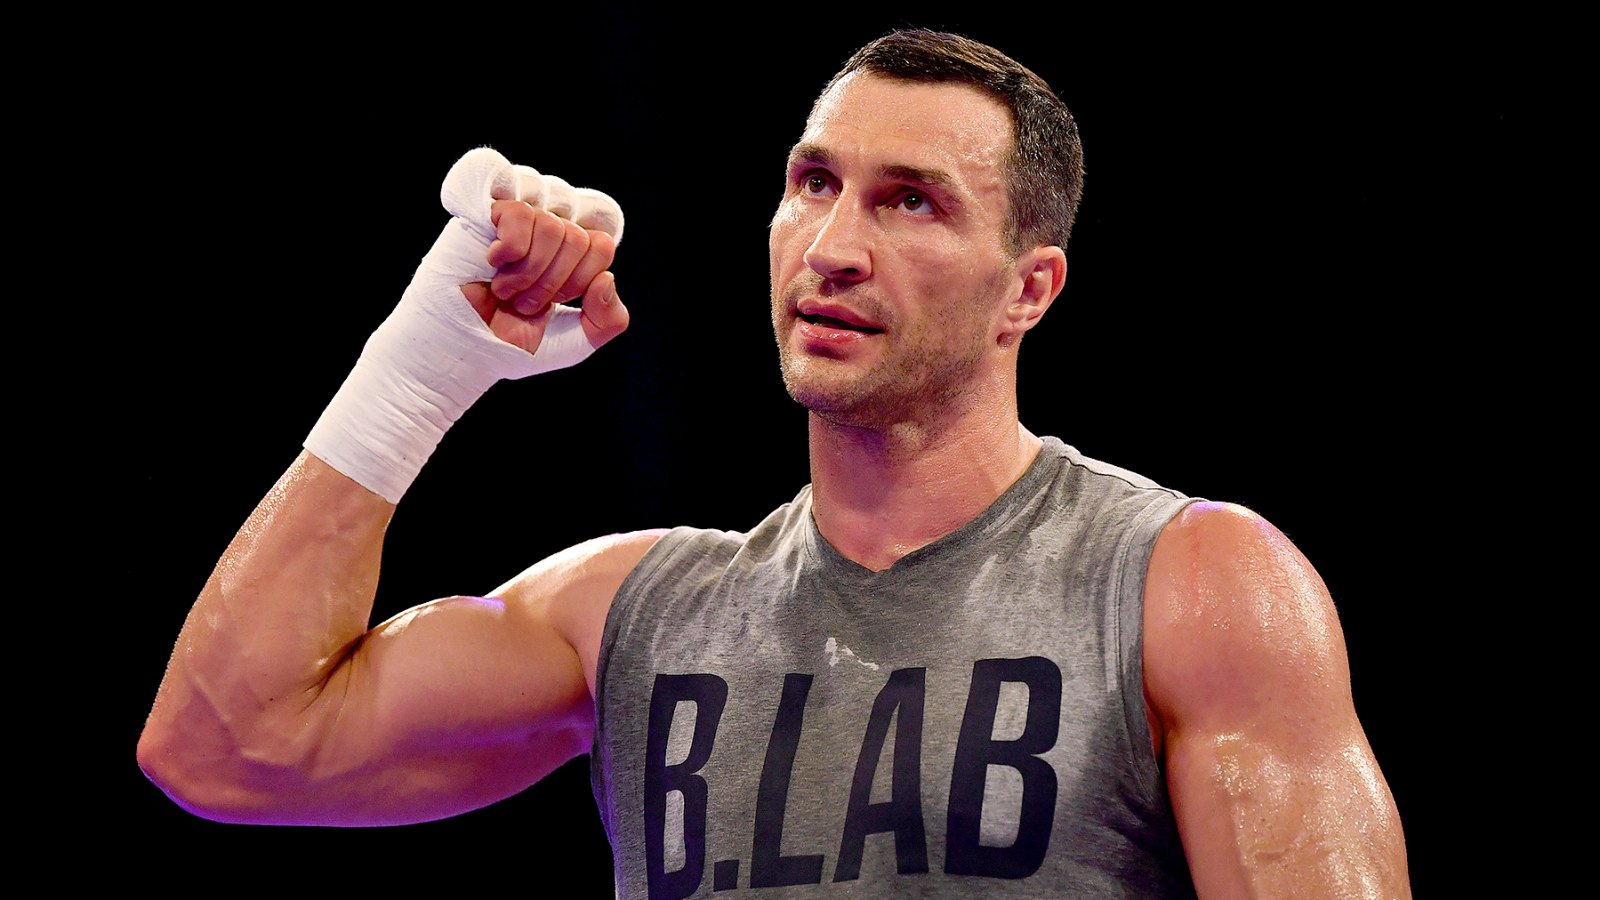 Wladimir Klitschko takes part in an open workout at Wembley Arena on April 26, 2017 in London, England. Anthony Joshua and Wladimir Klitschko are due to fight for the IBF, IBO and WBA Super Heavyweight Championships of the World at Wembley Stadium on April 29, 2017.